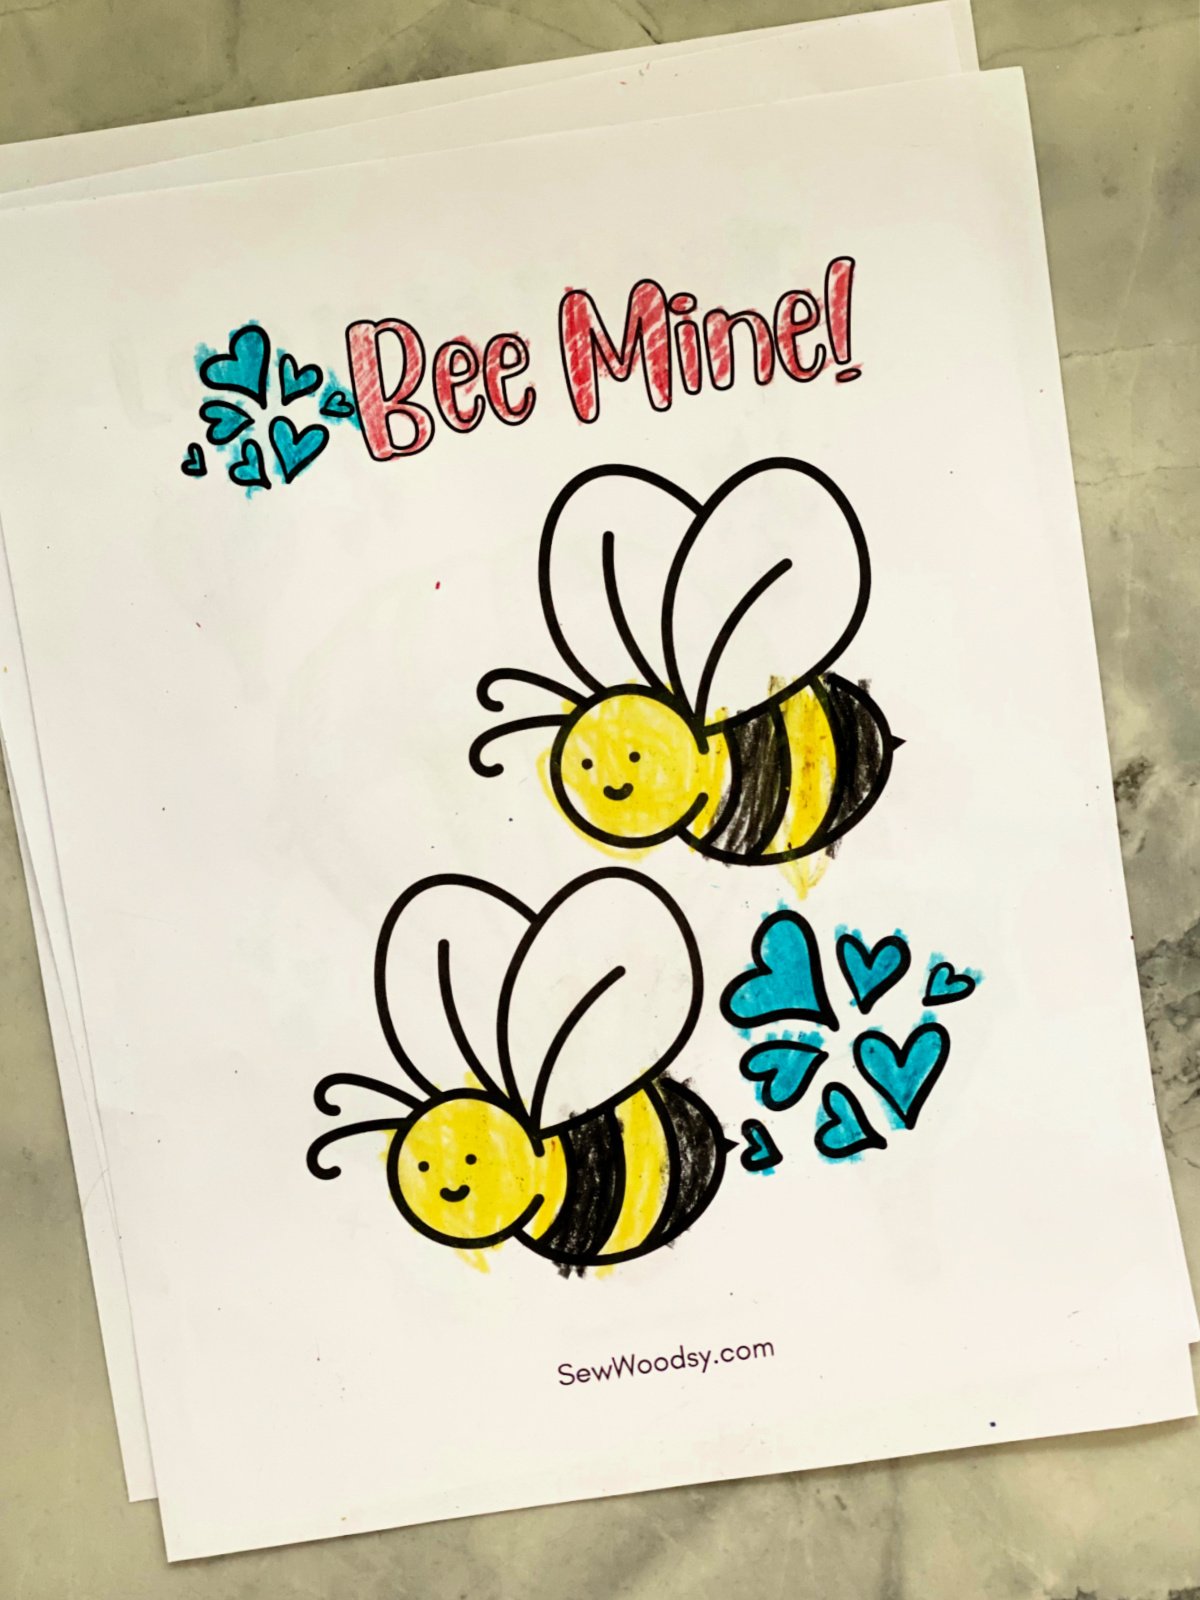 Two bees on a page that are colored in with the phrase "Bee Mine!"